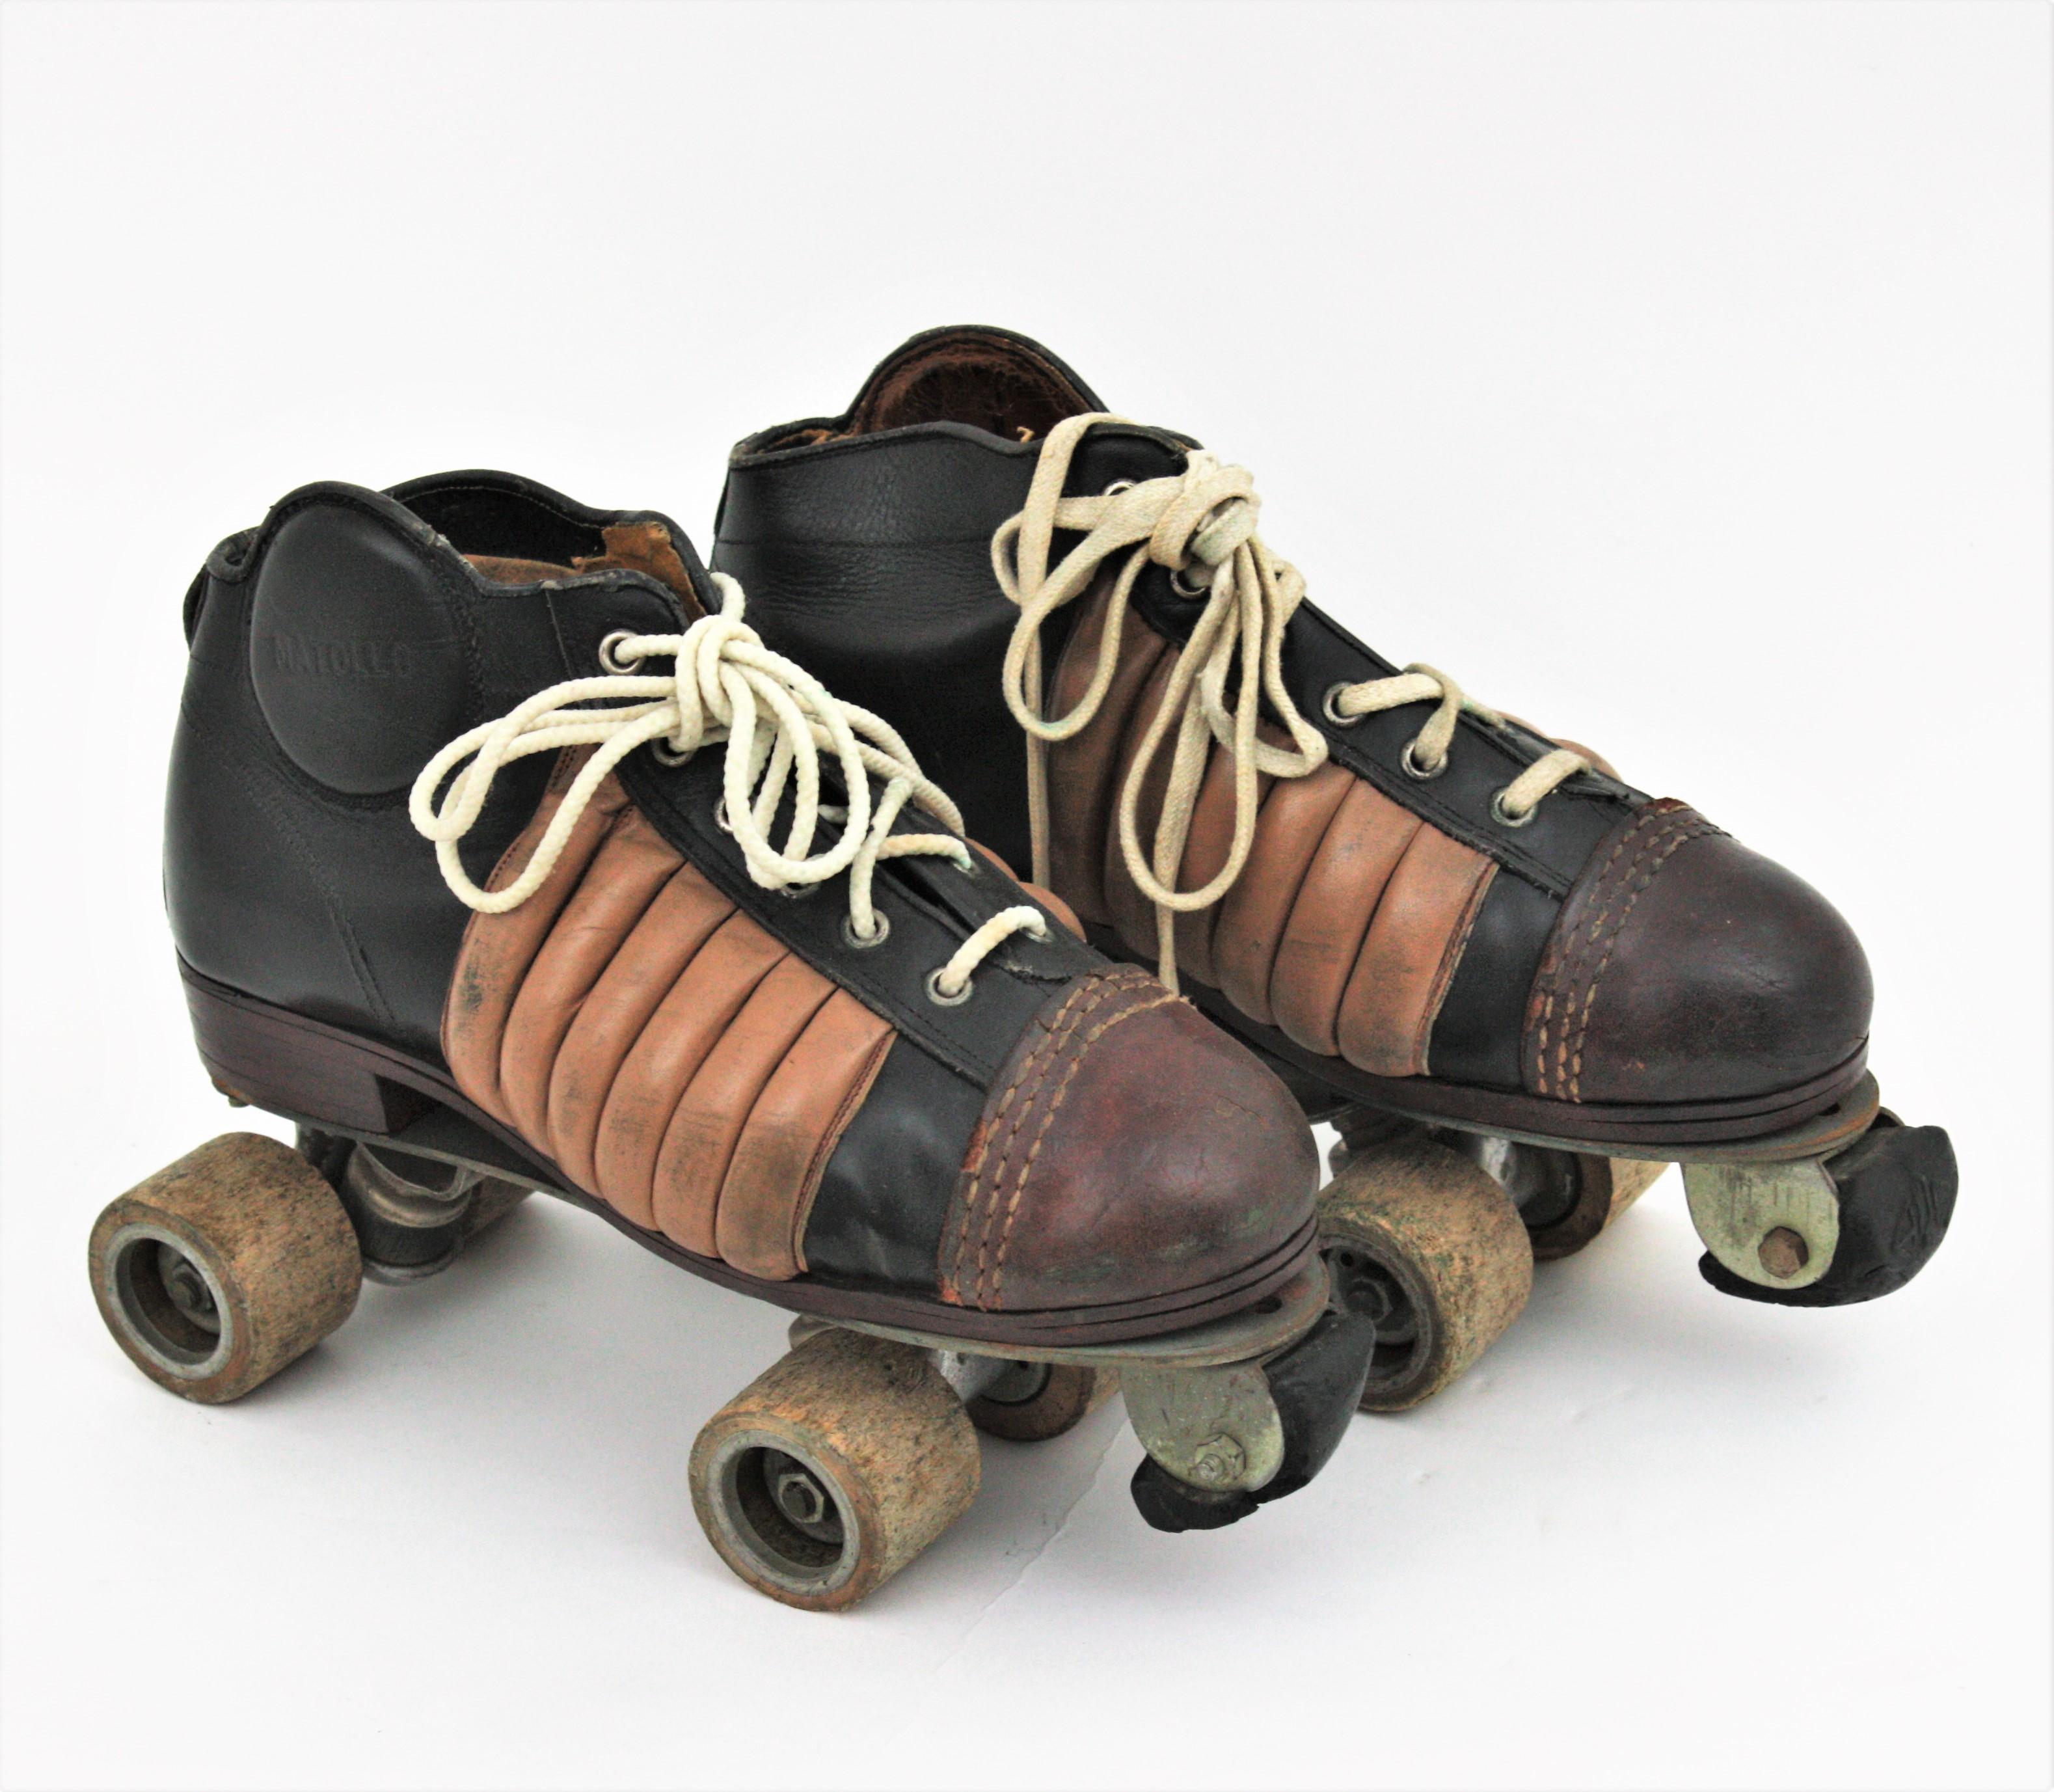 Vintage hockey roller skakes in black and brown leather. Manufactured by Matollo, Spain, 1950s-1960.
The boots are made in leather on a metal base with wooden wheels.
For sports & curiosity collectors, for decorative purposes or for occasional use